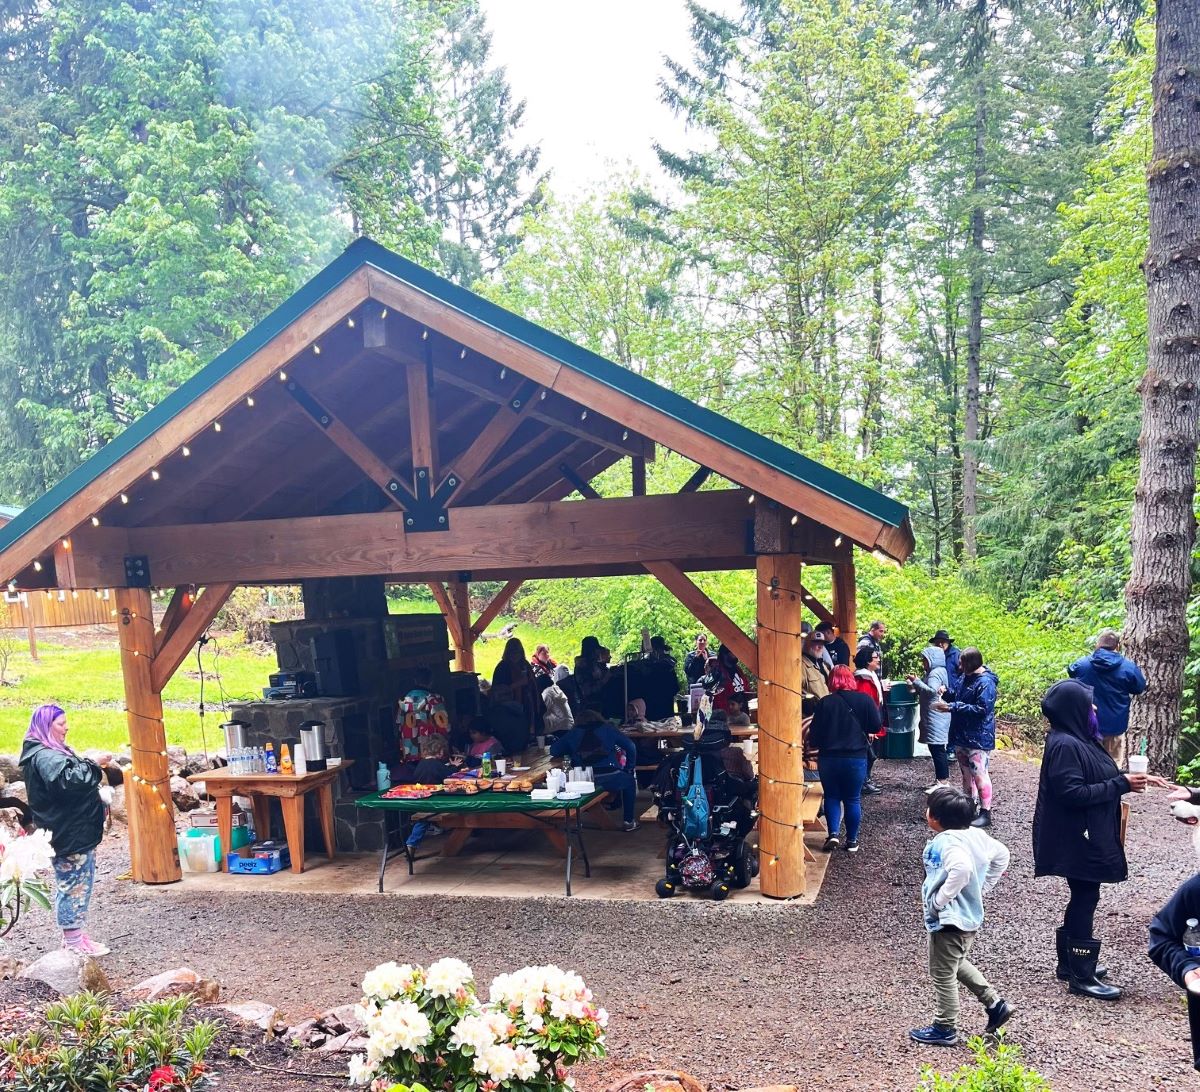 Covered Area at Hopkins Demonstration Forest - Event being held 